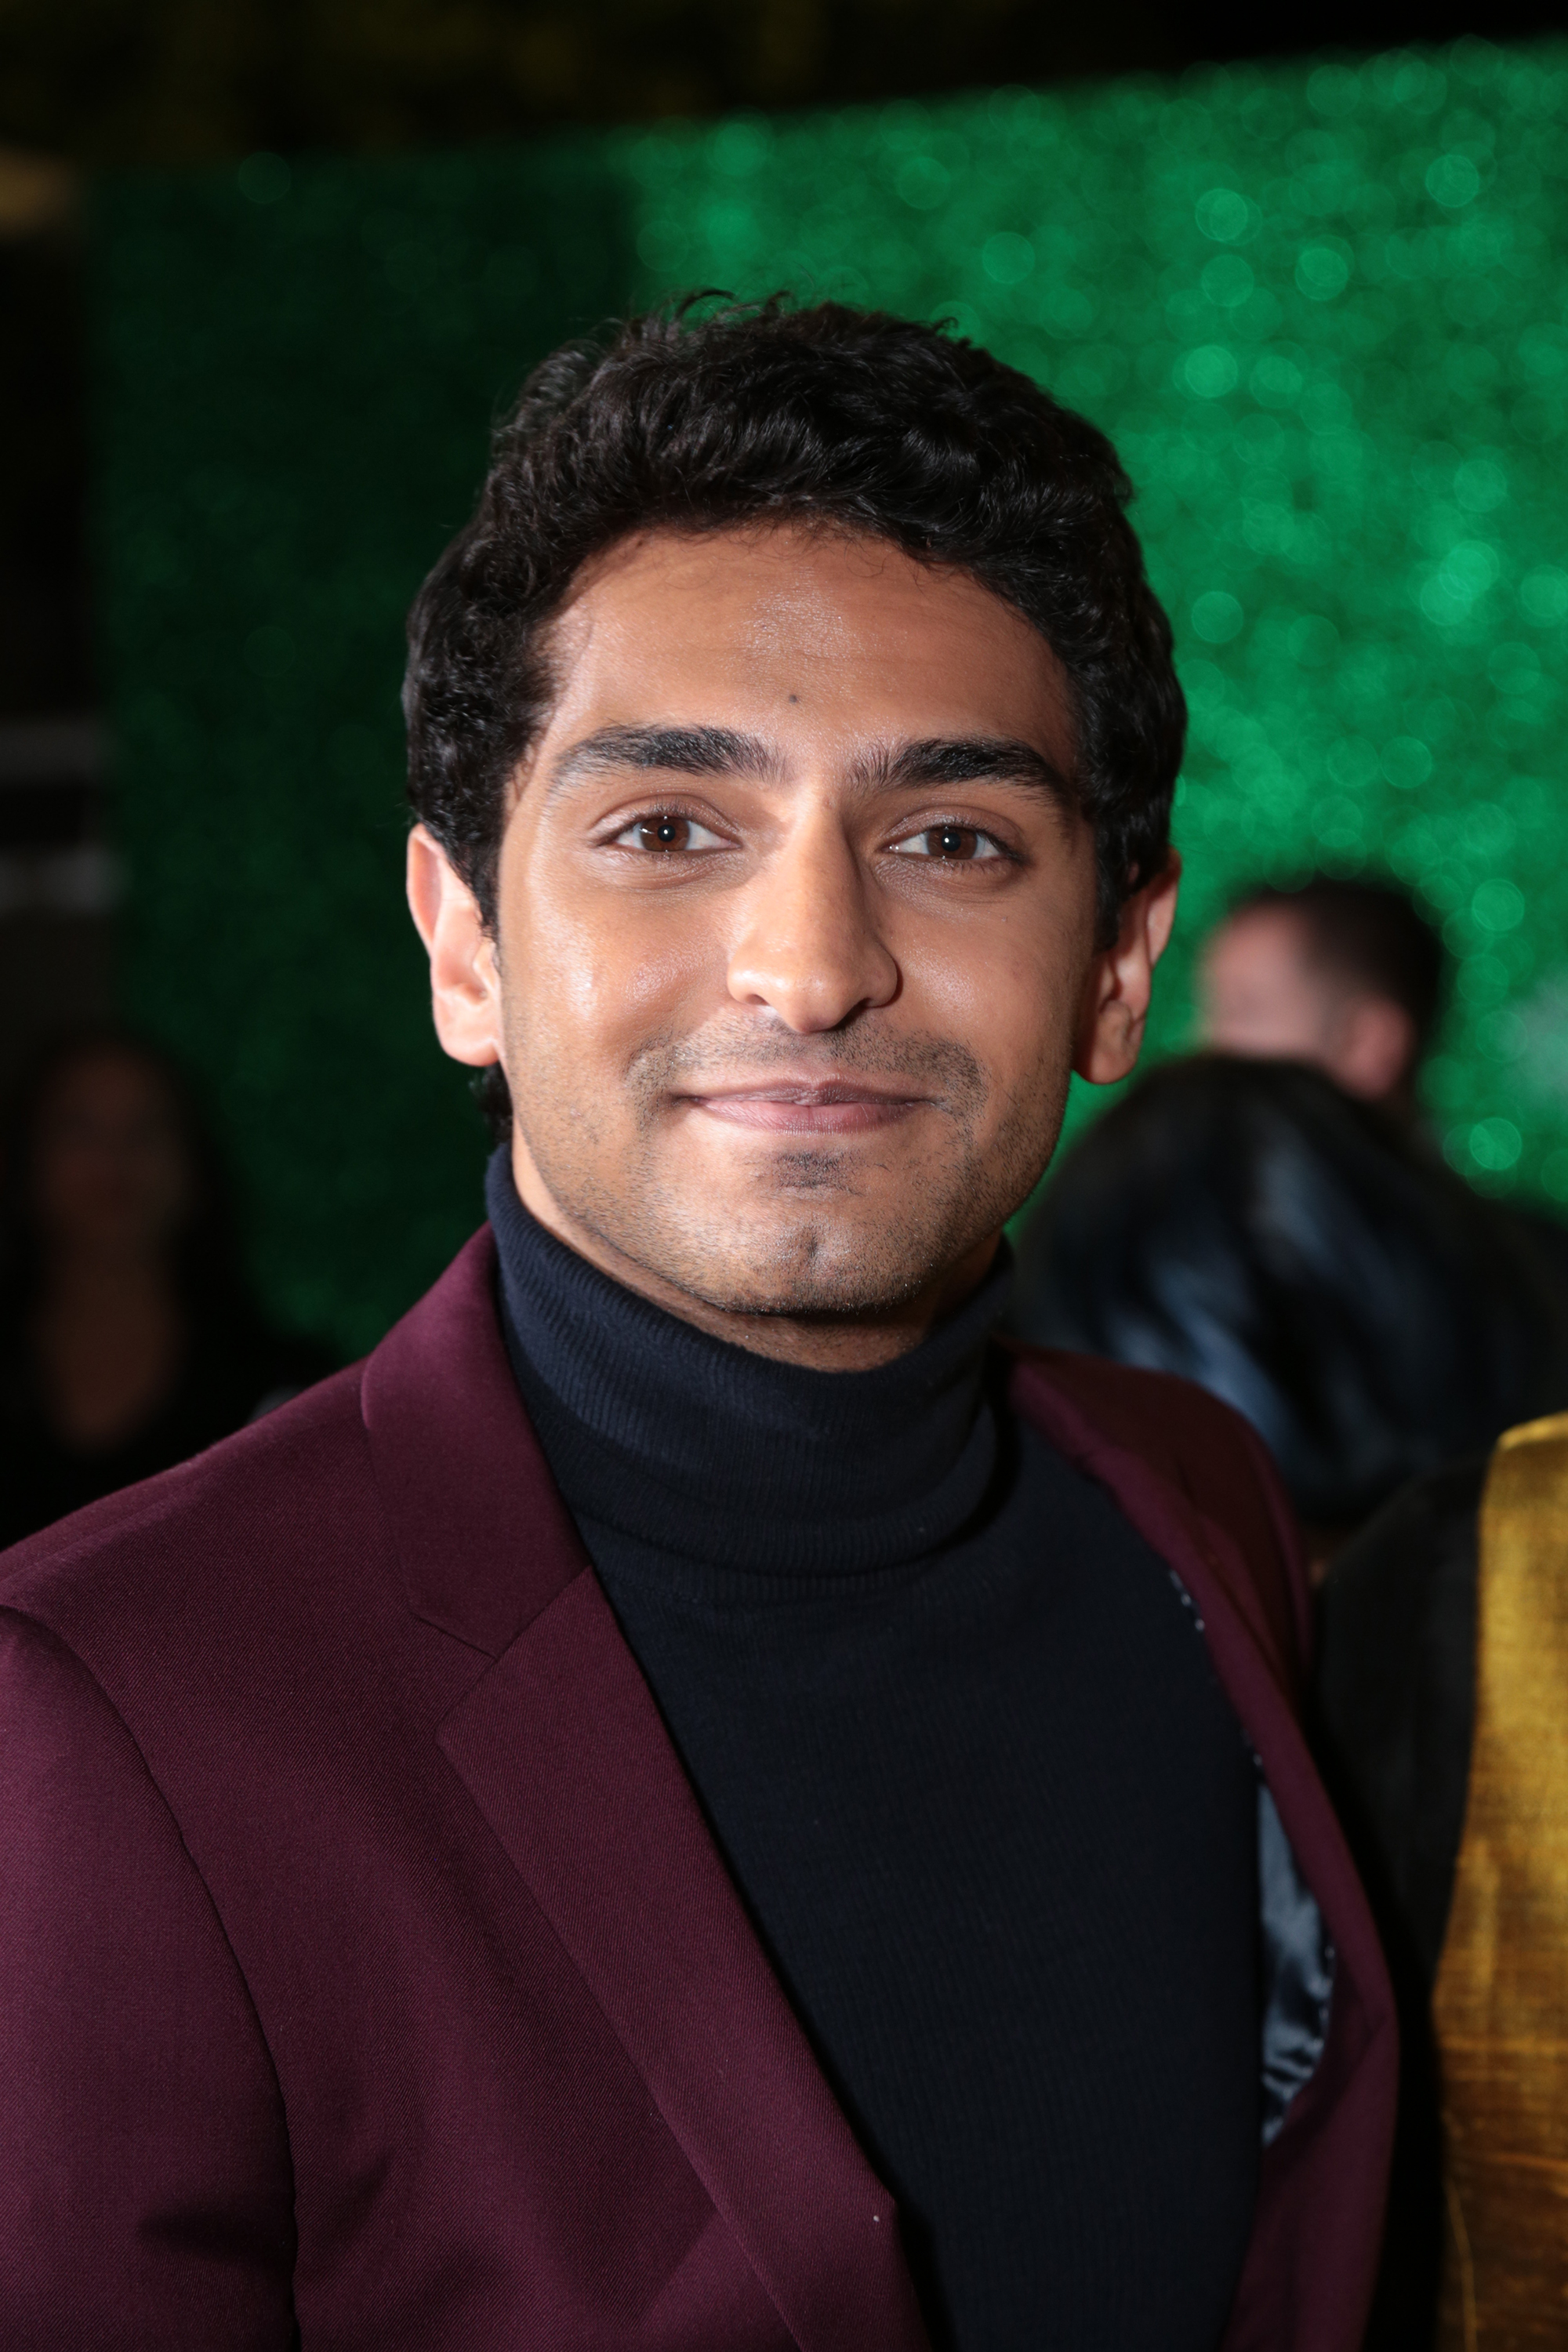 Karan Soni poses as Paramount Pictures presents the Los Angeles premiere of "Office Christmas Party" at the Regency Village Theater in Los Angeles, CA on Wednesday, December 7, 2016  (Photo: Alex J. Berliner / ABImages)